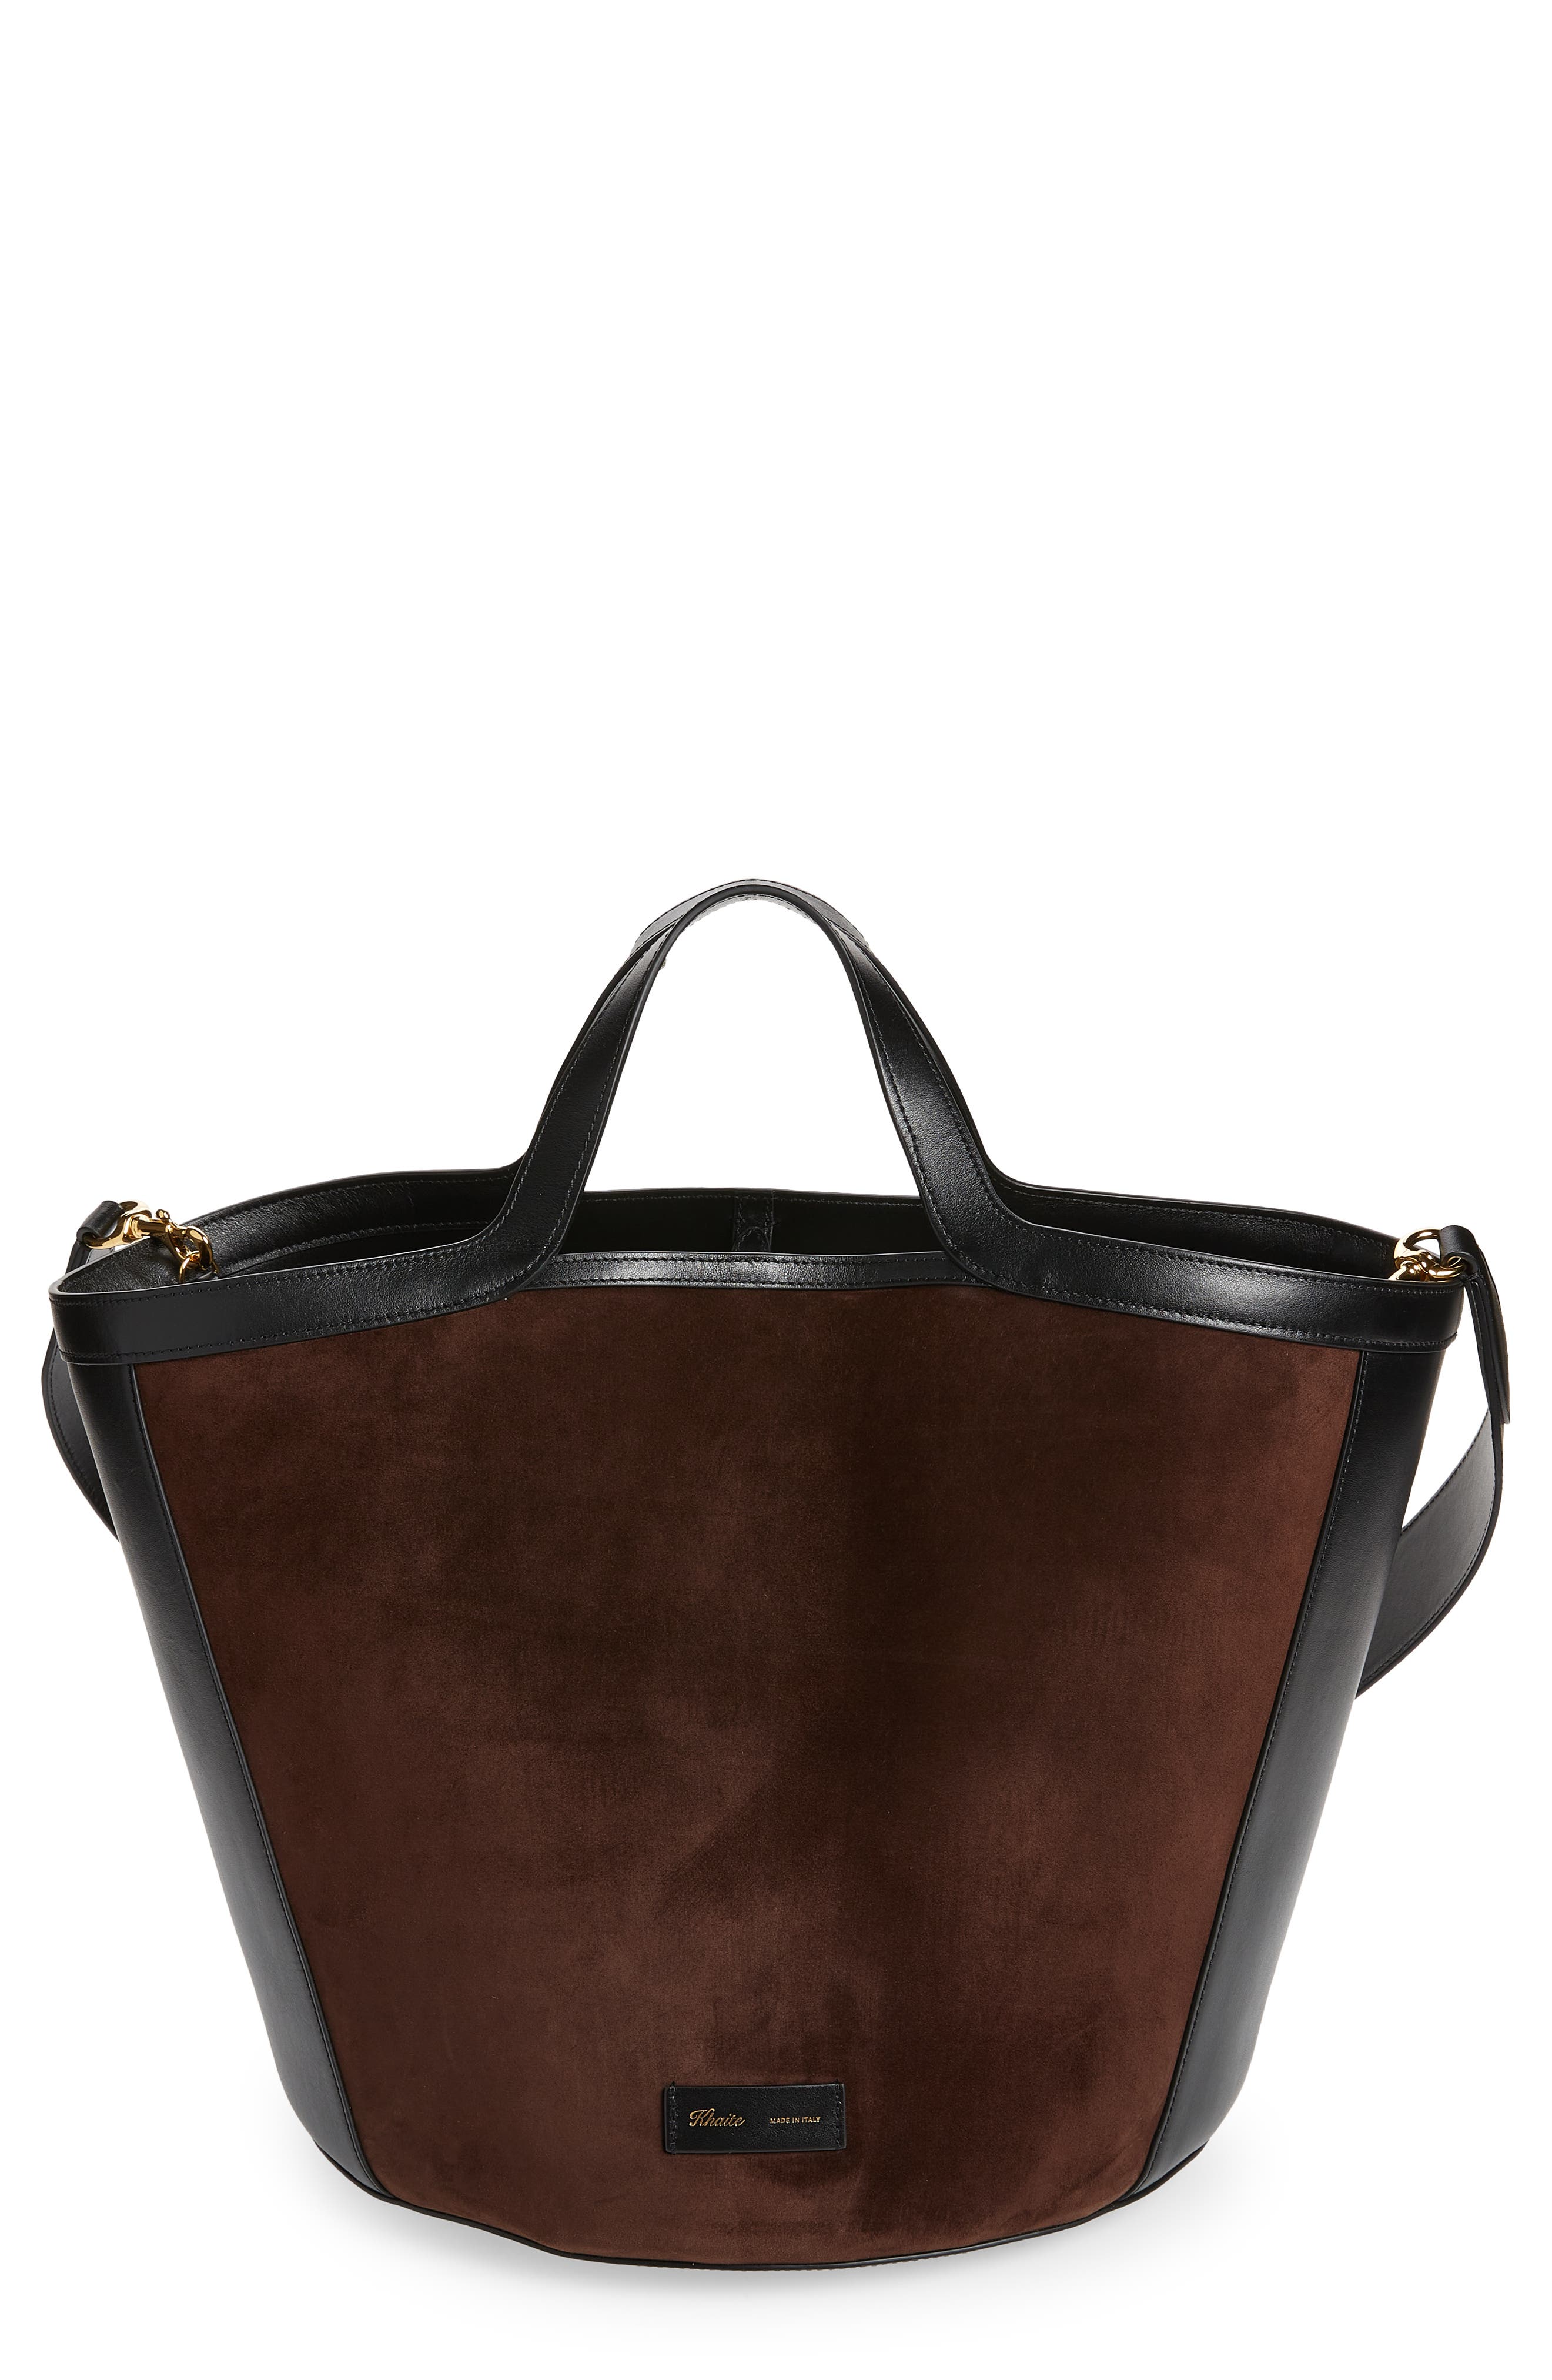 Khaite Nora Suede & Leather Tote in Coffee